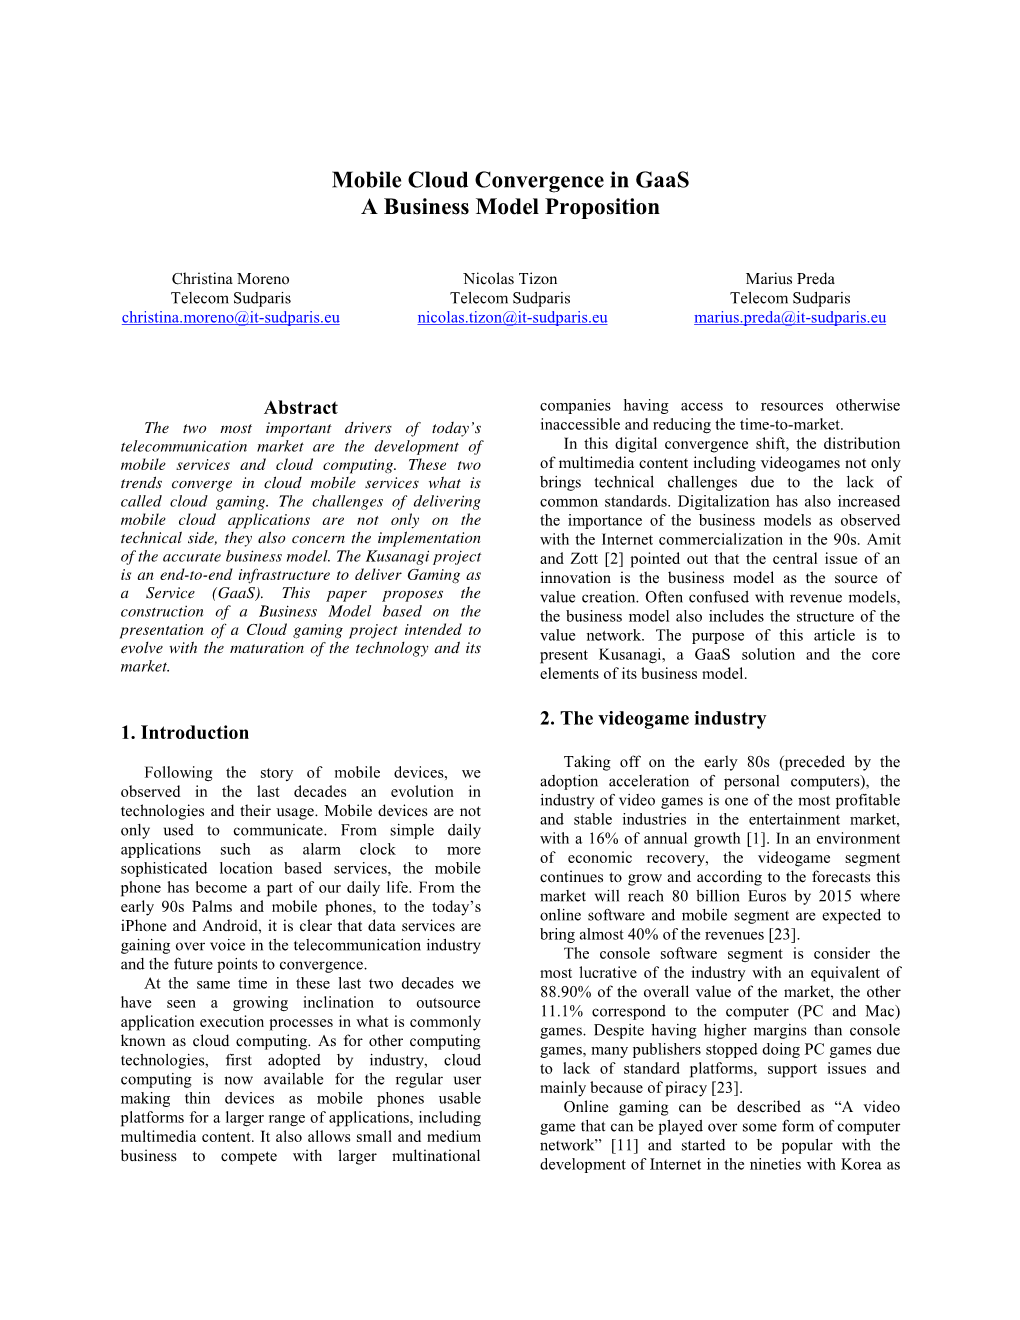 Mobile Cloud Convergence in Gaas a Business Model Proposition